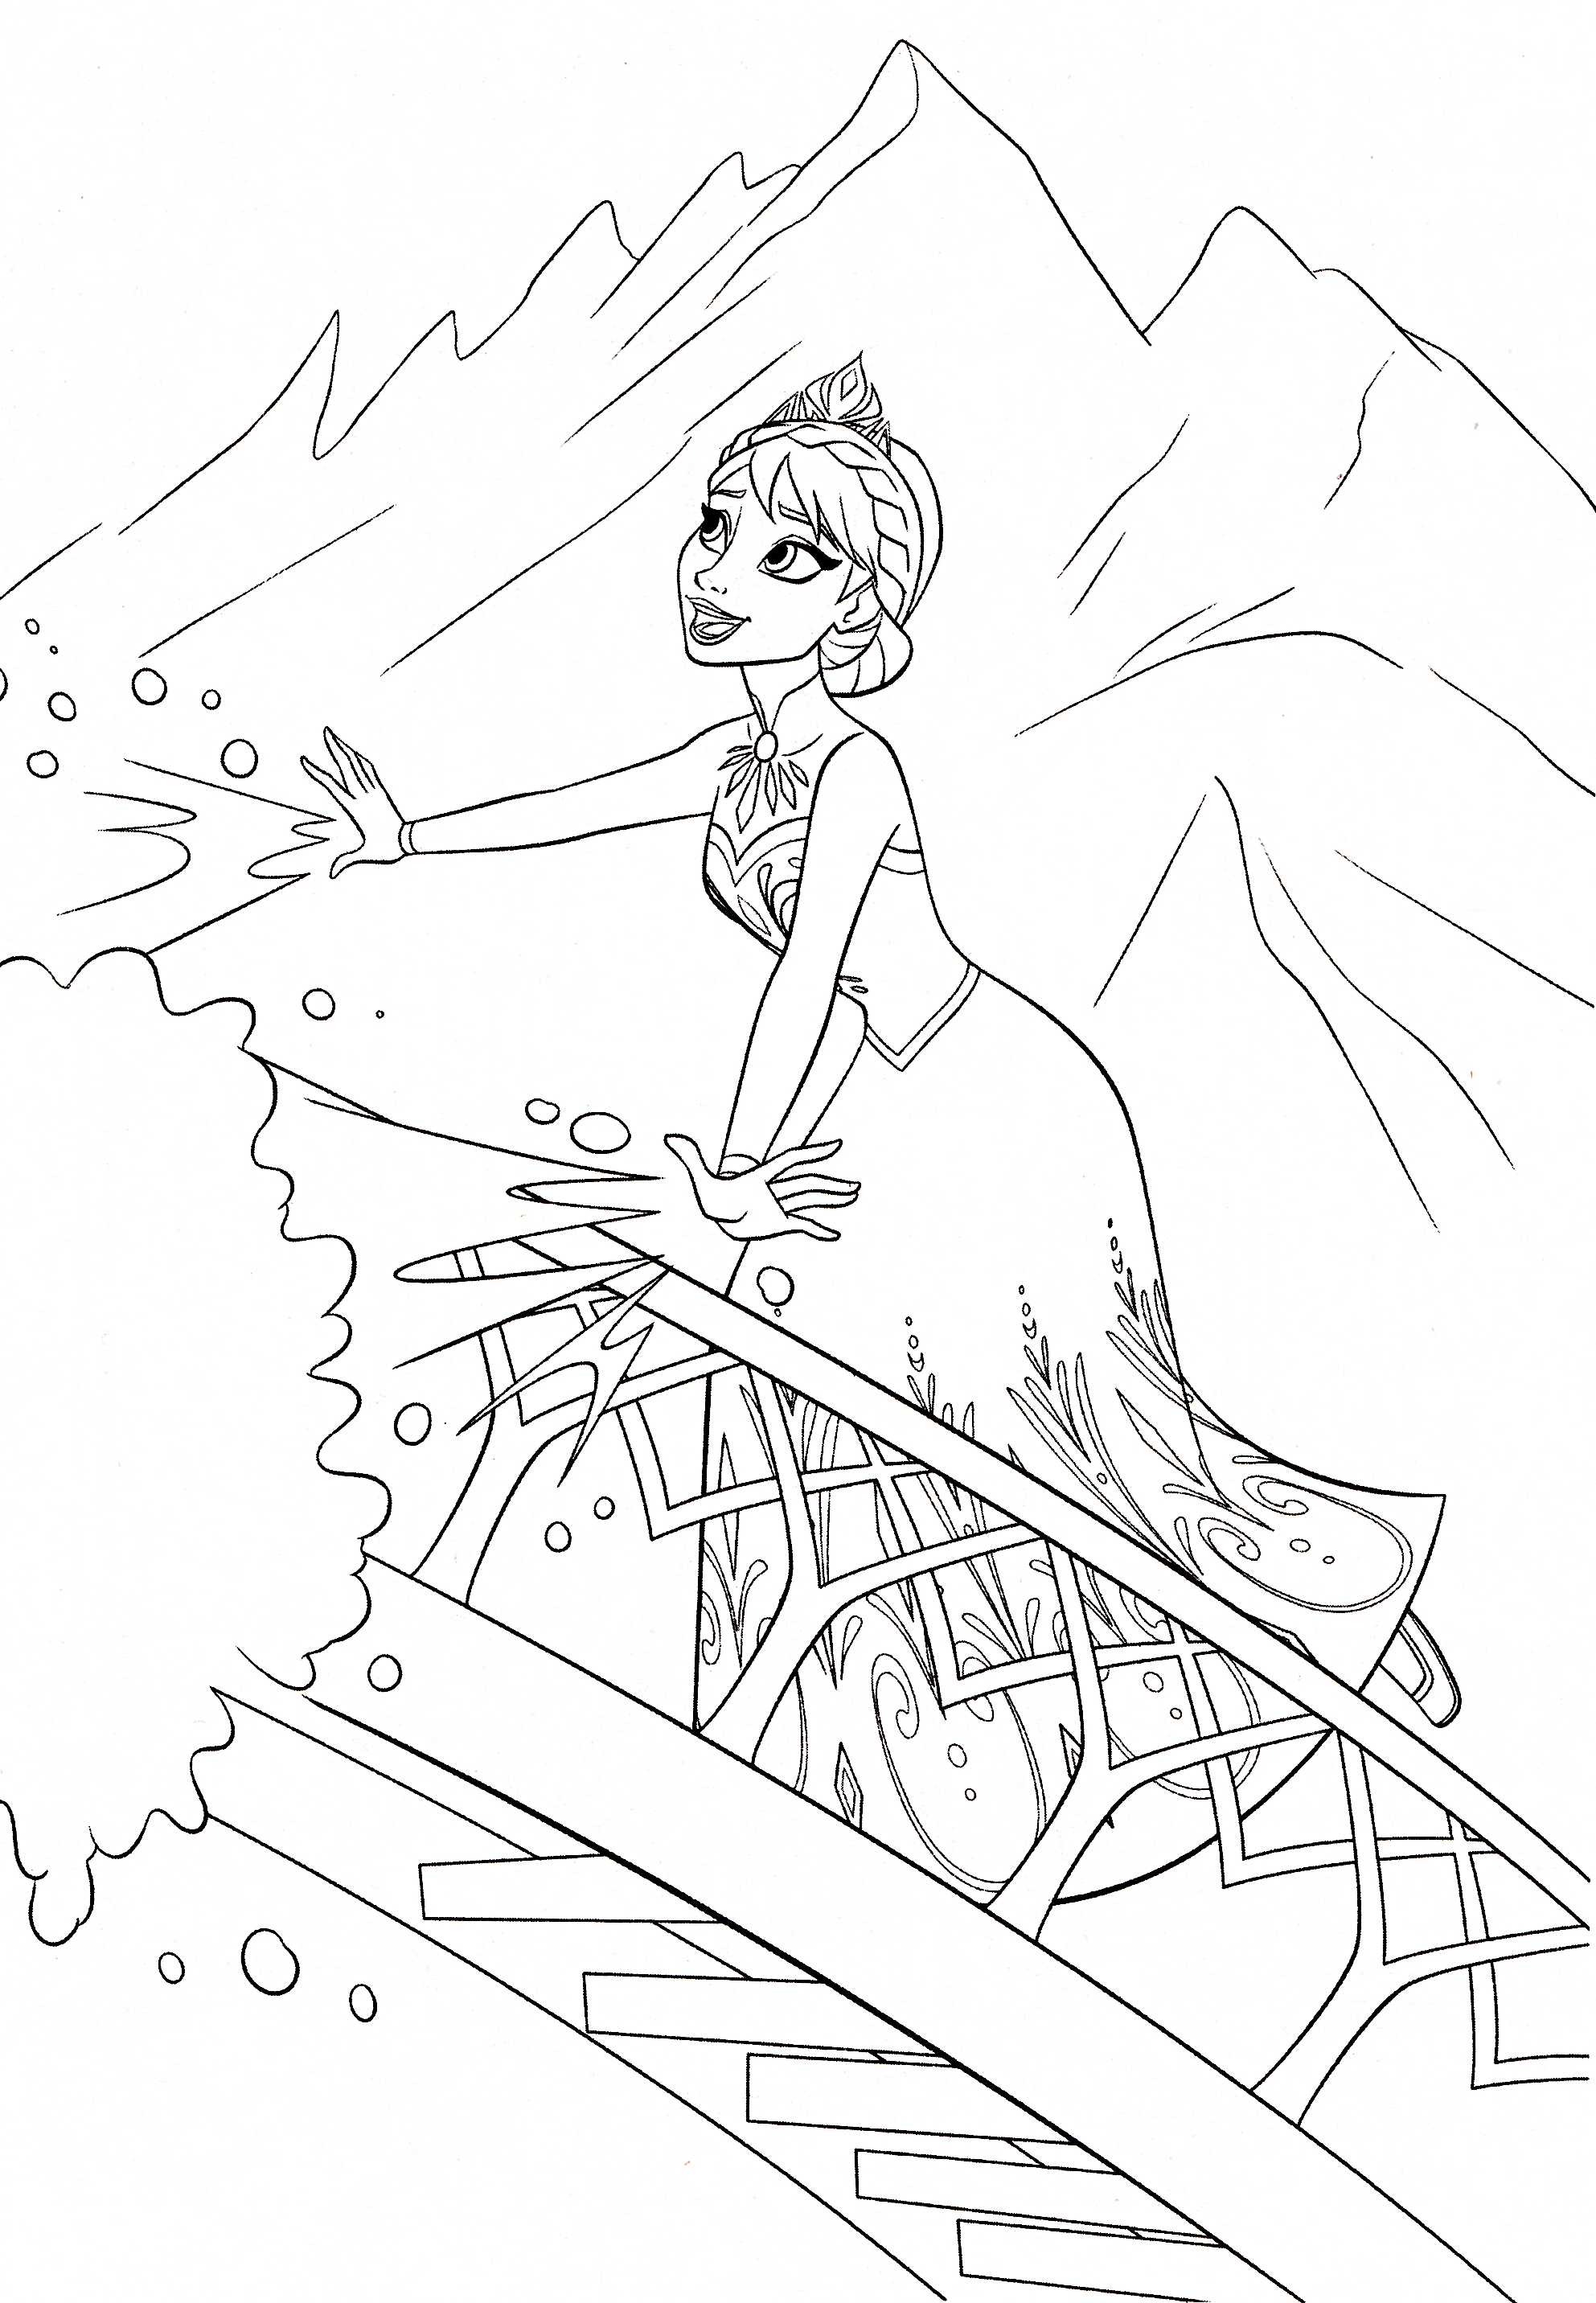 Frozen Coloring-Pages | Color pages | FREE coloring pages for kids |Printable coloring pages for kids| #26